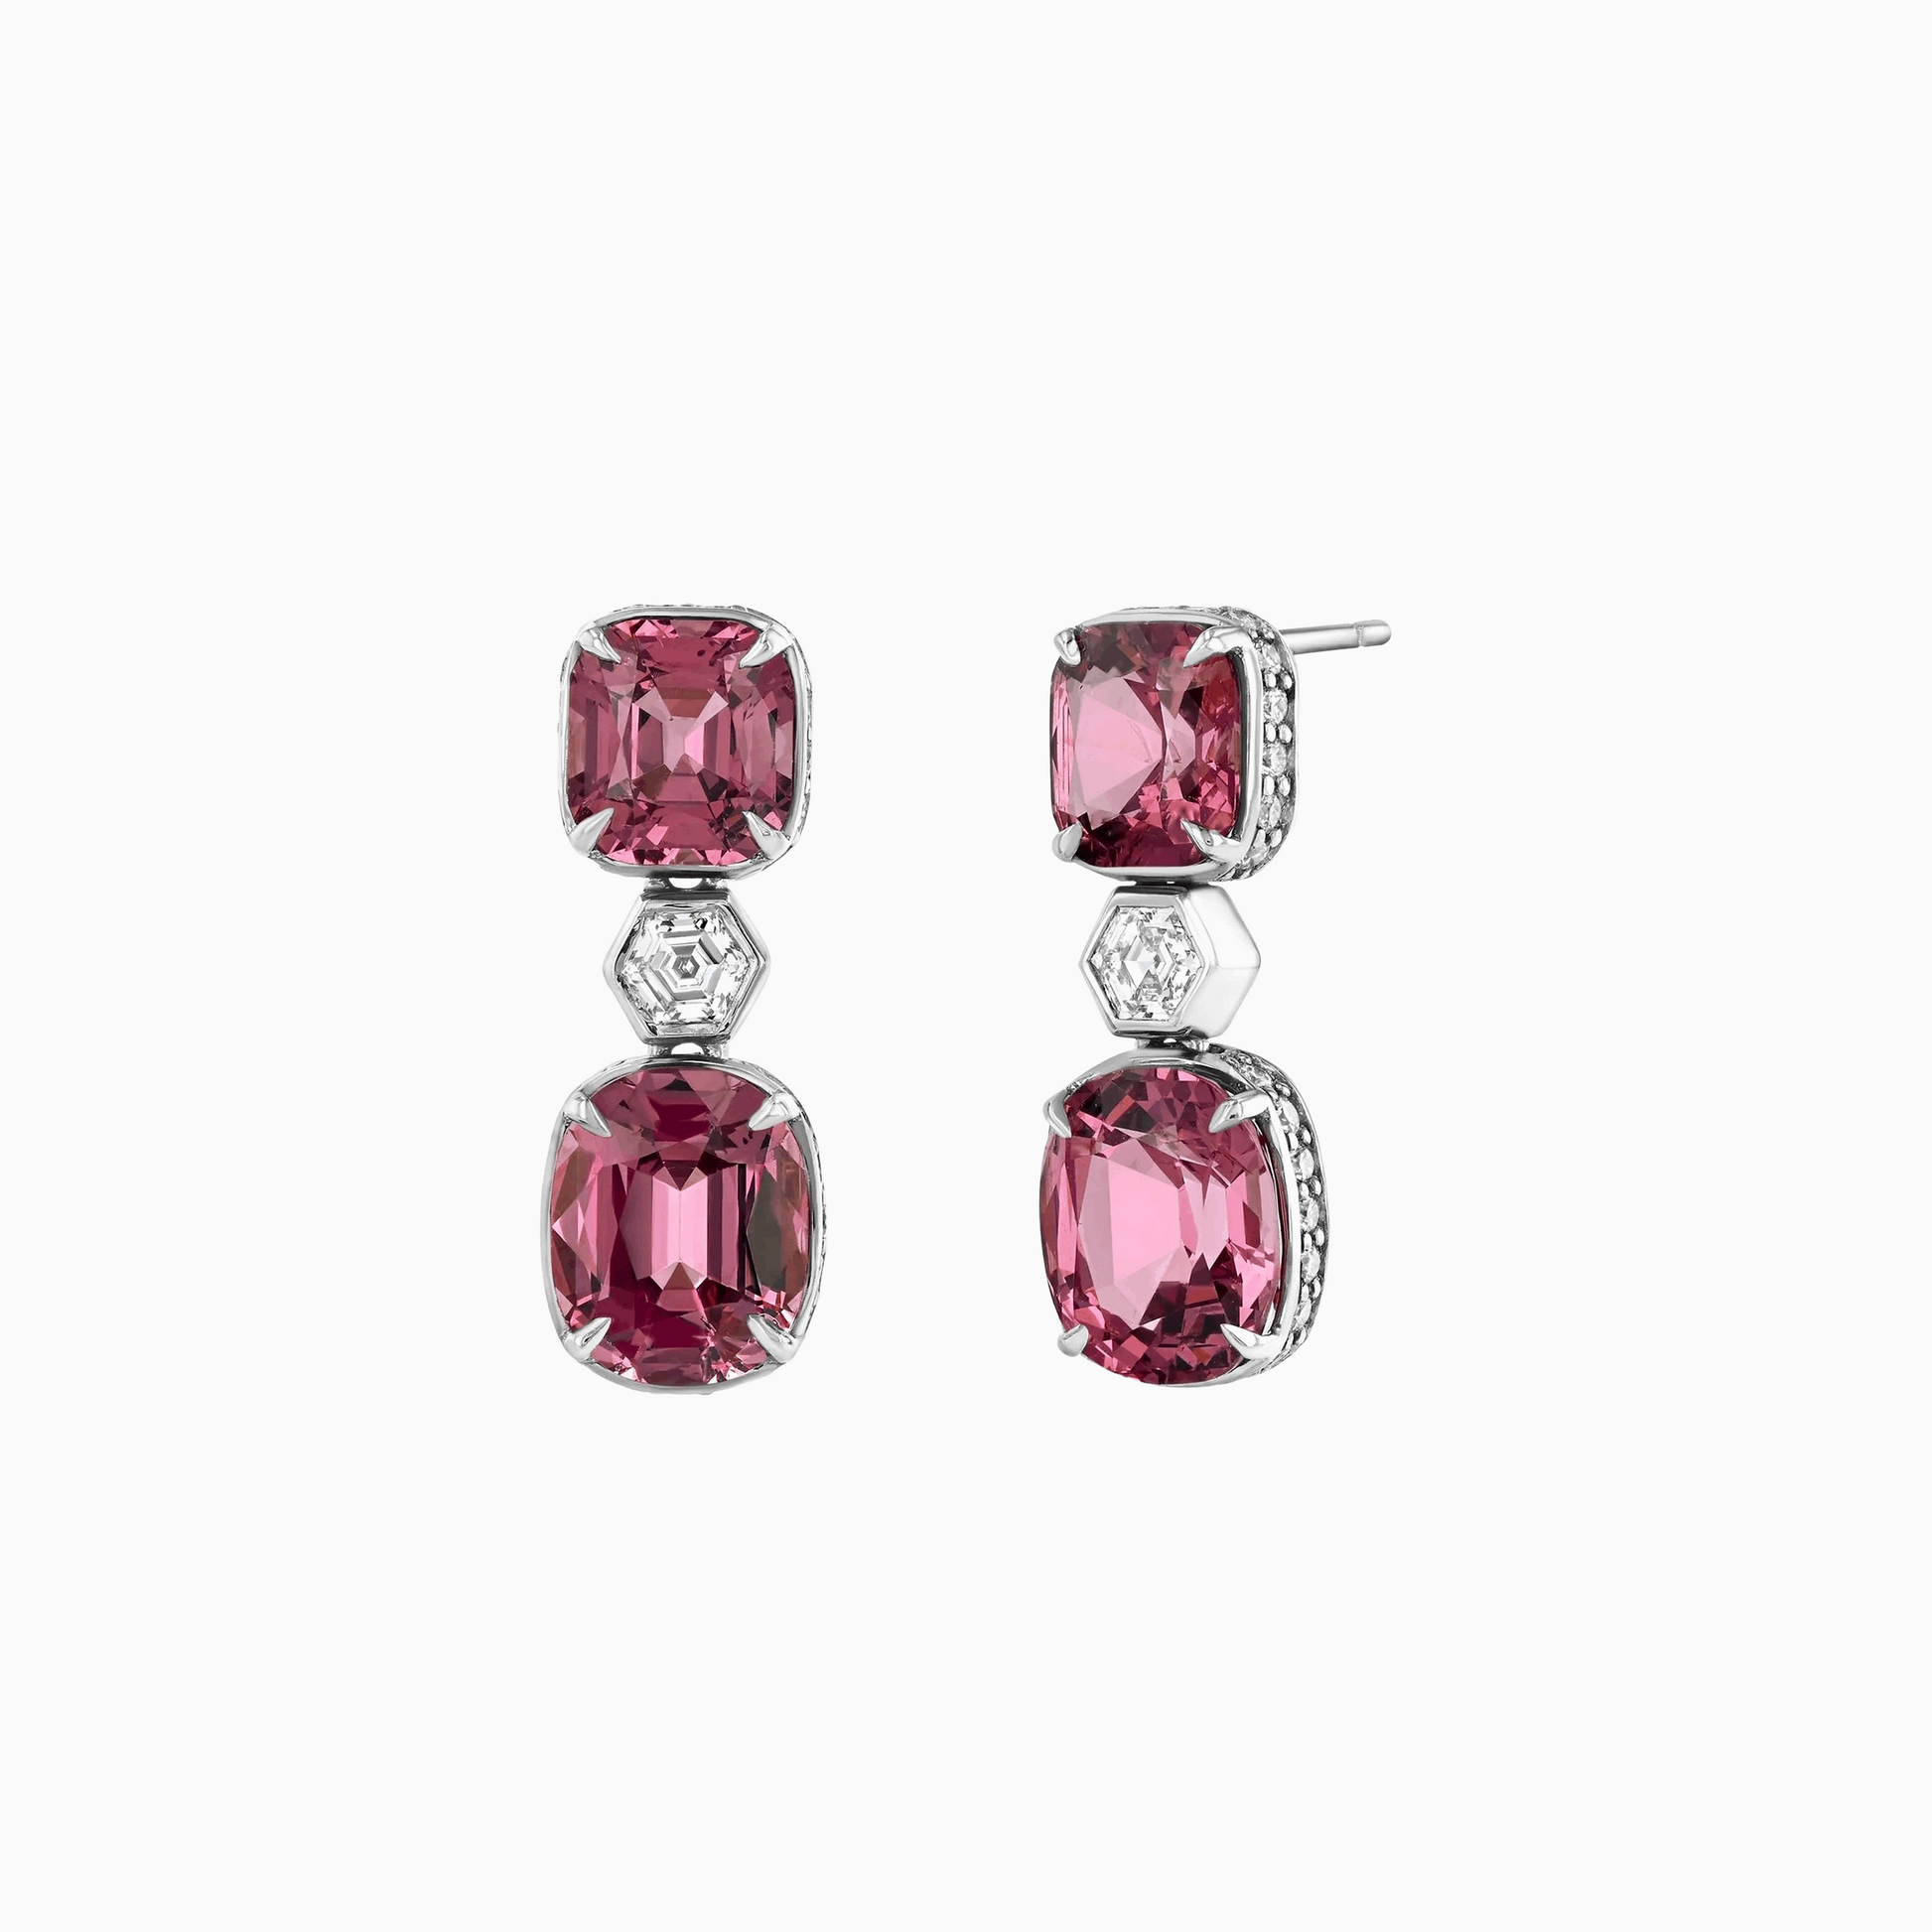 Pink Spinel Diamond Gold Earrings on a white background